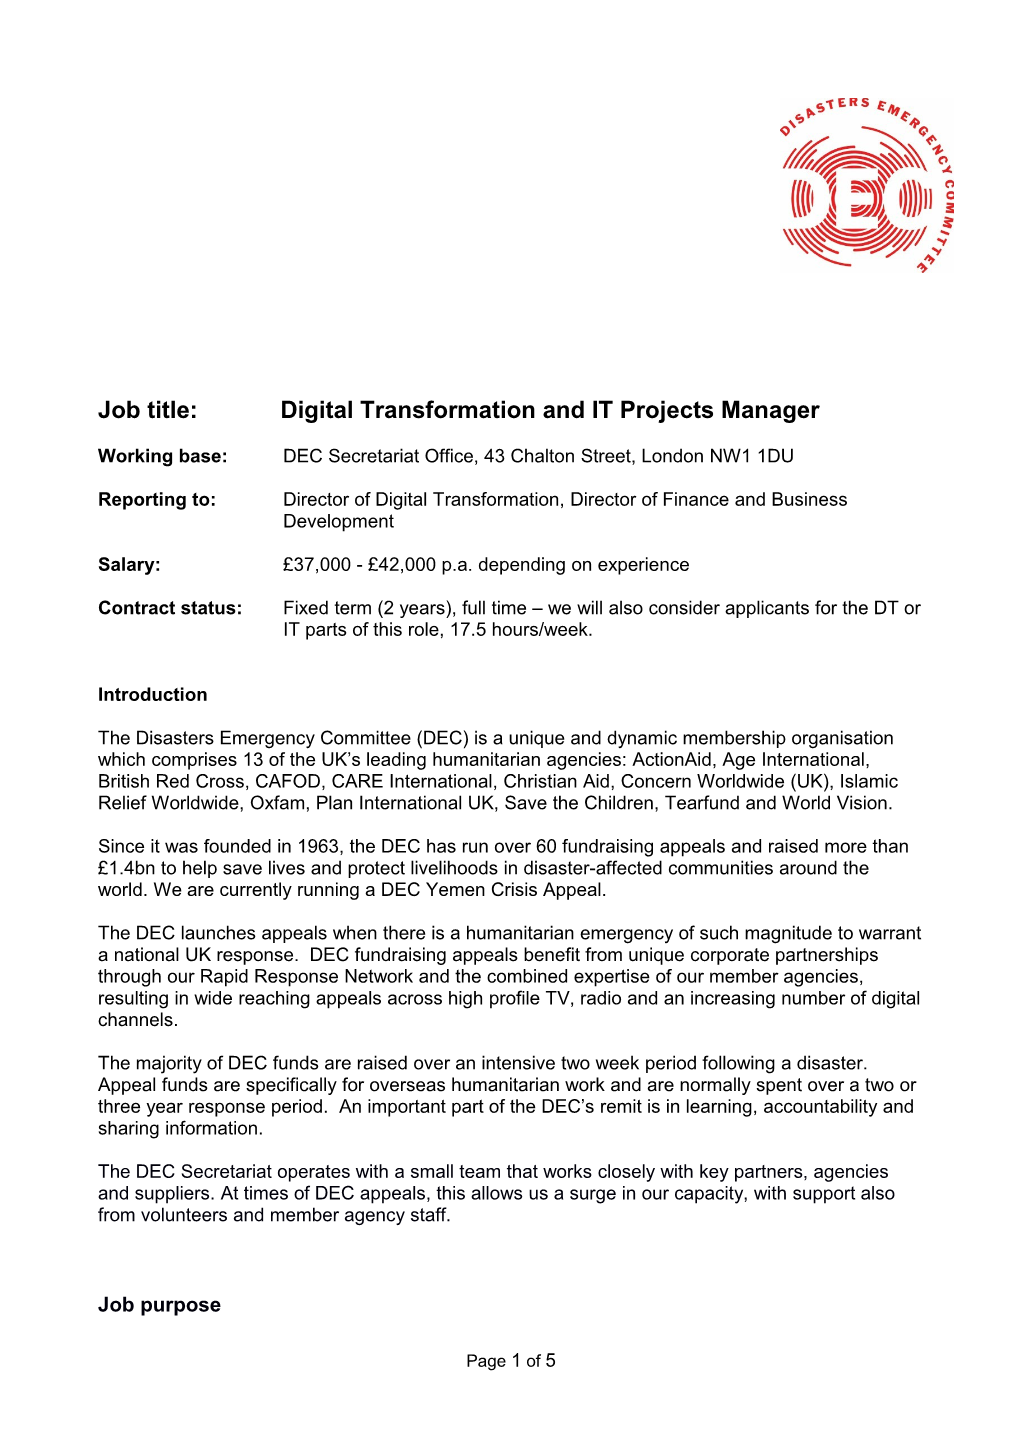 Job Title: Digital Transformation and IT Projects Manager